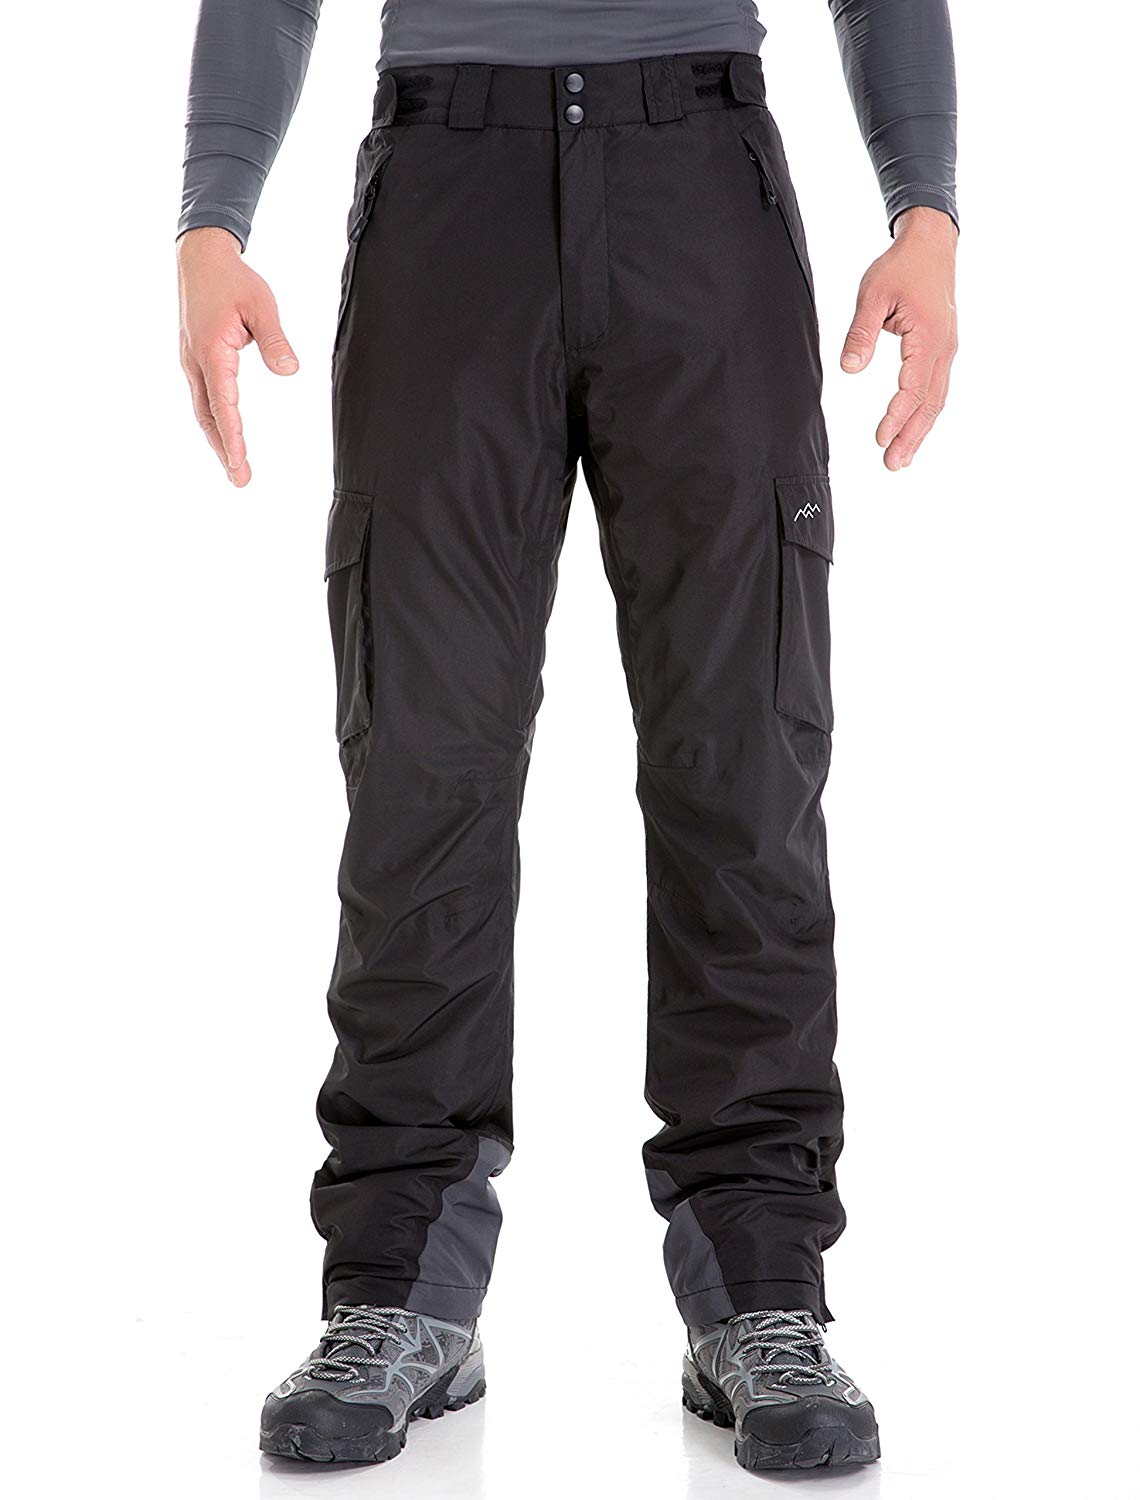 Top 10 Best Men's Insulated Mountaineering Pants 2018 - Top Value Reviews